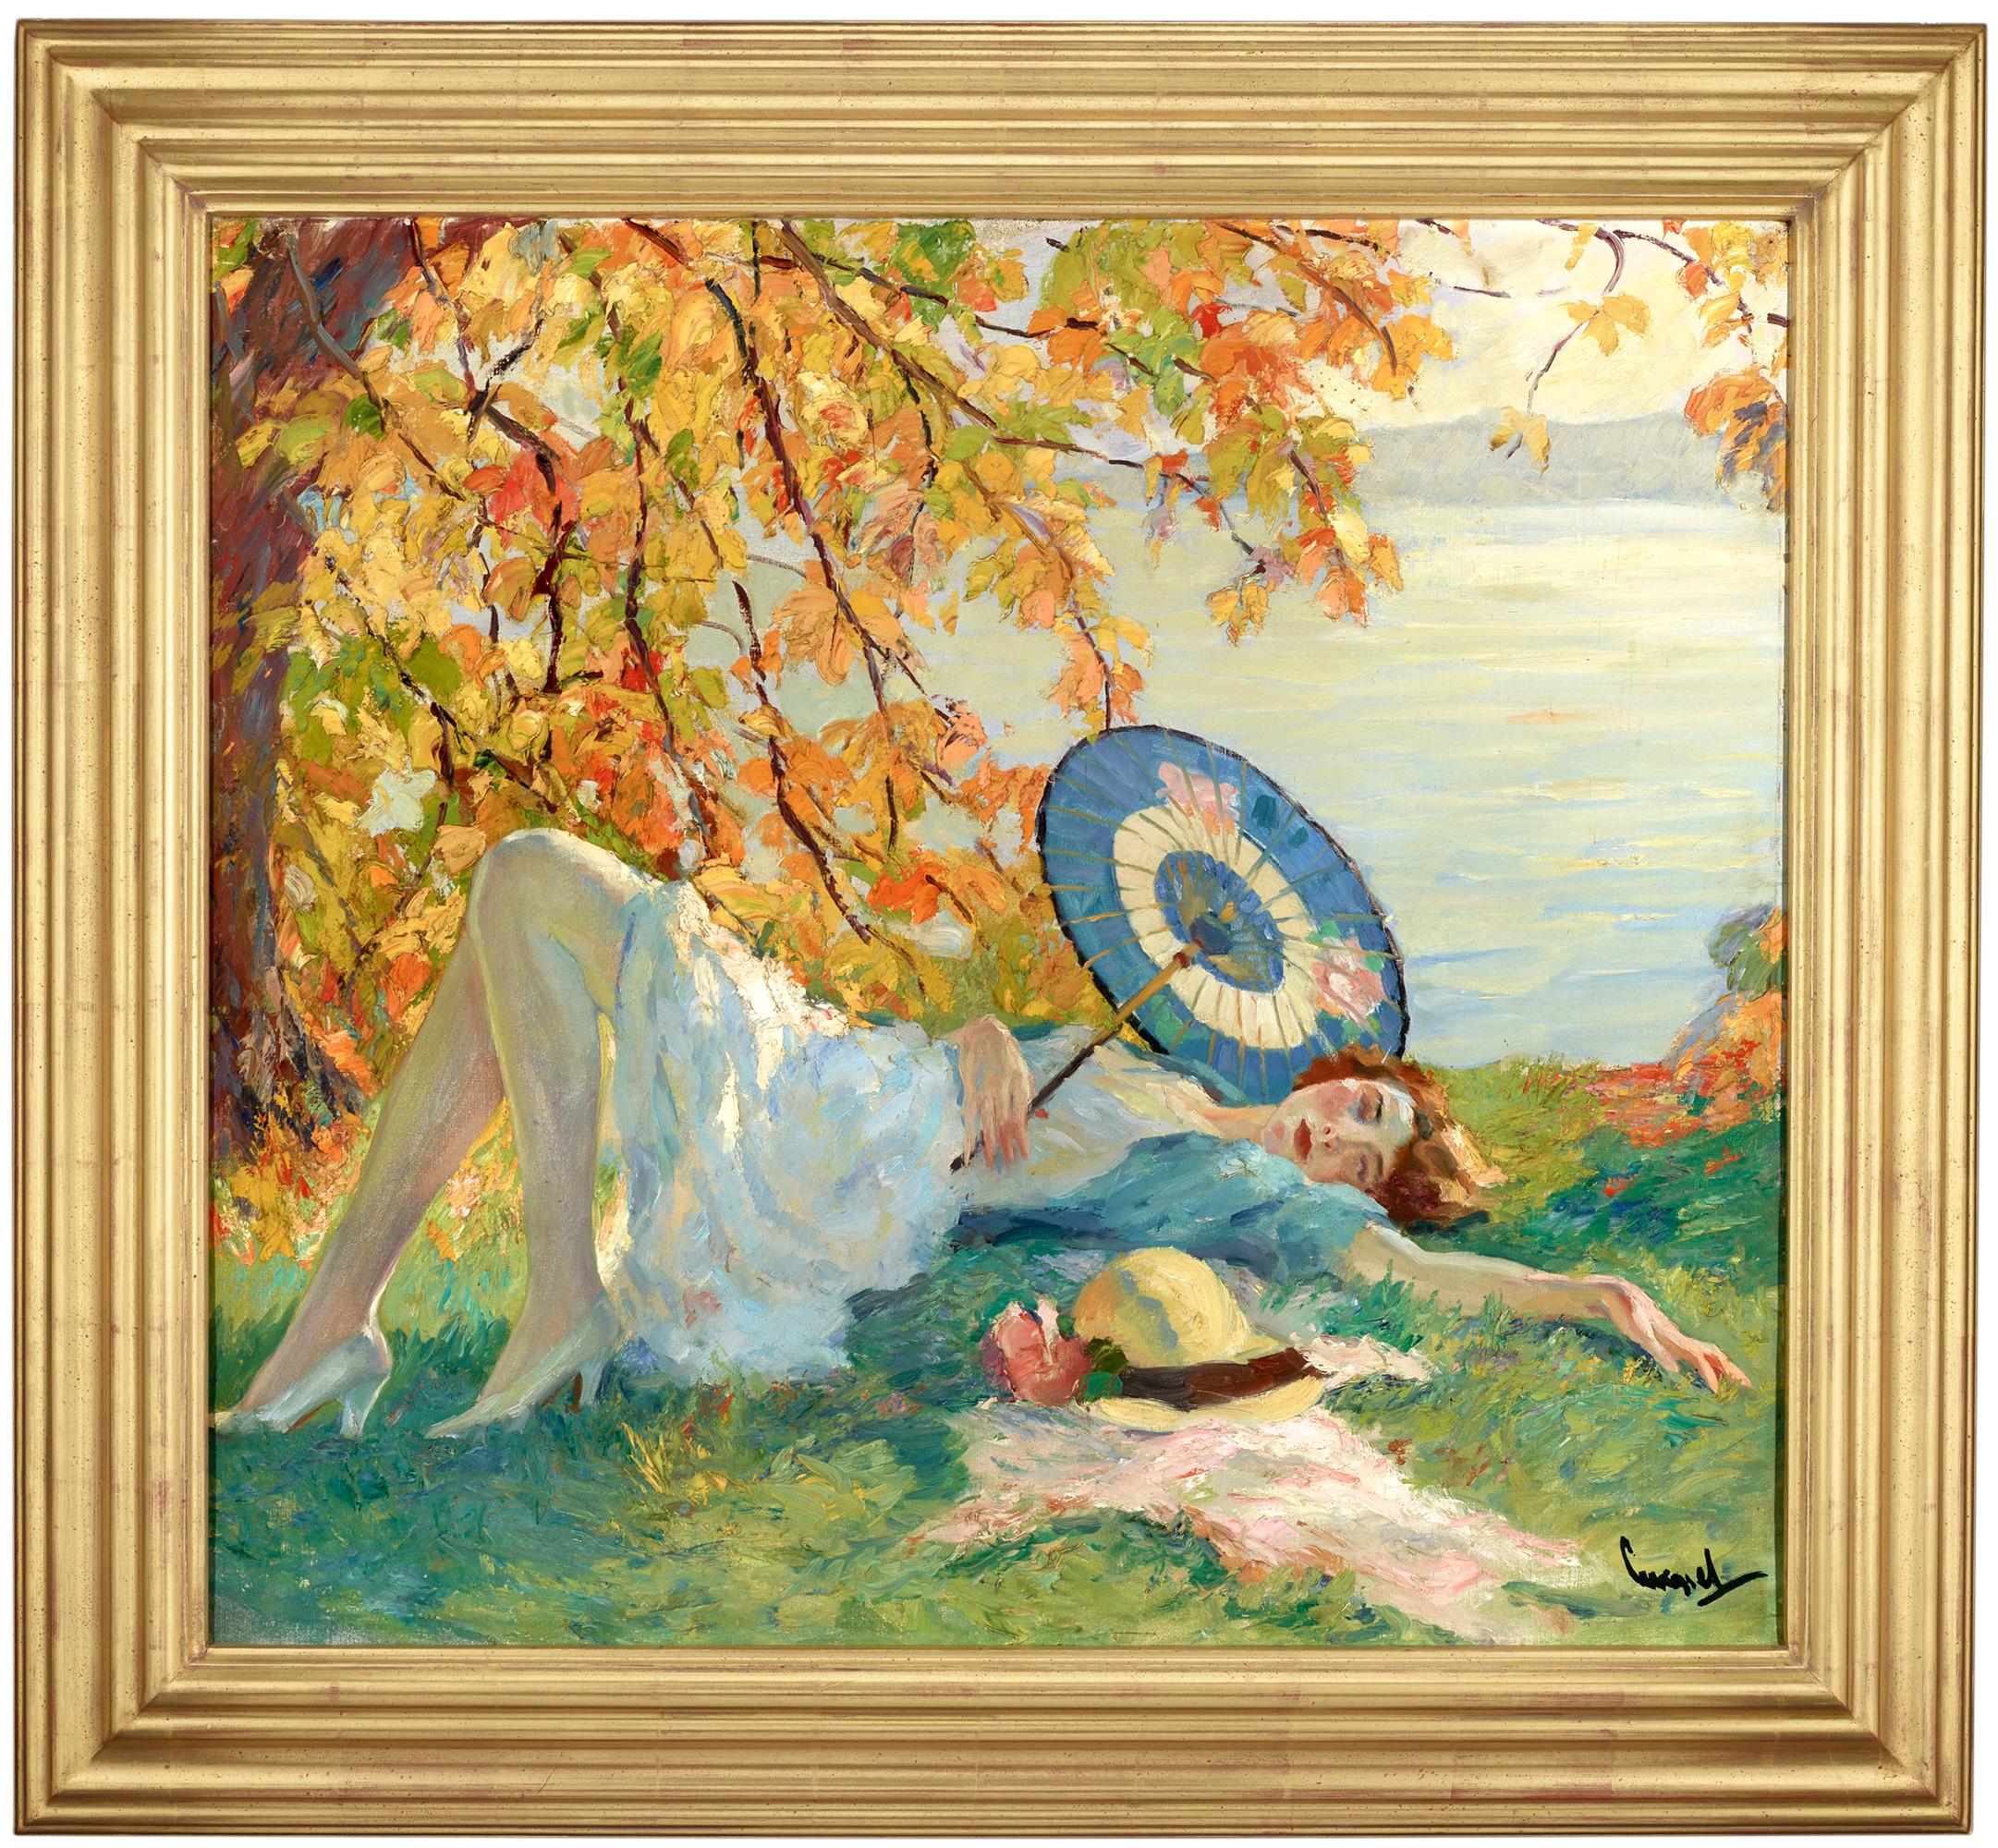 Woman Reclining by a Lake - Painting by Edward Cucuel